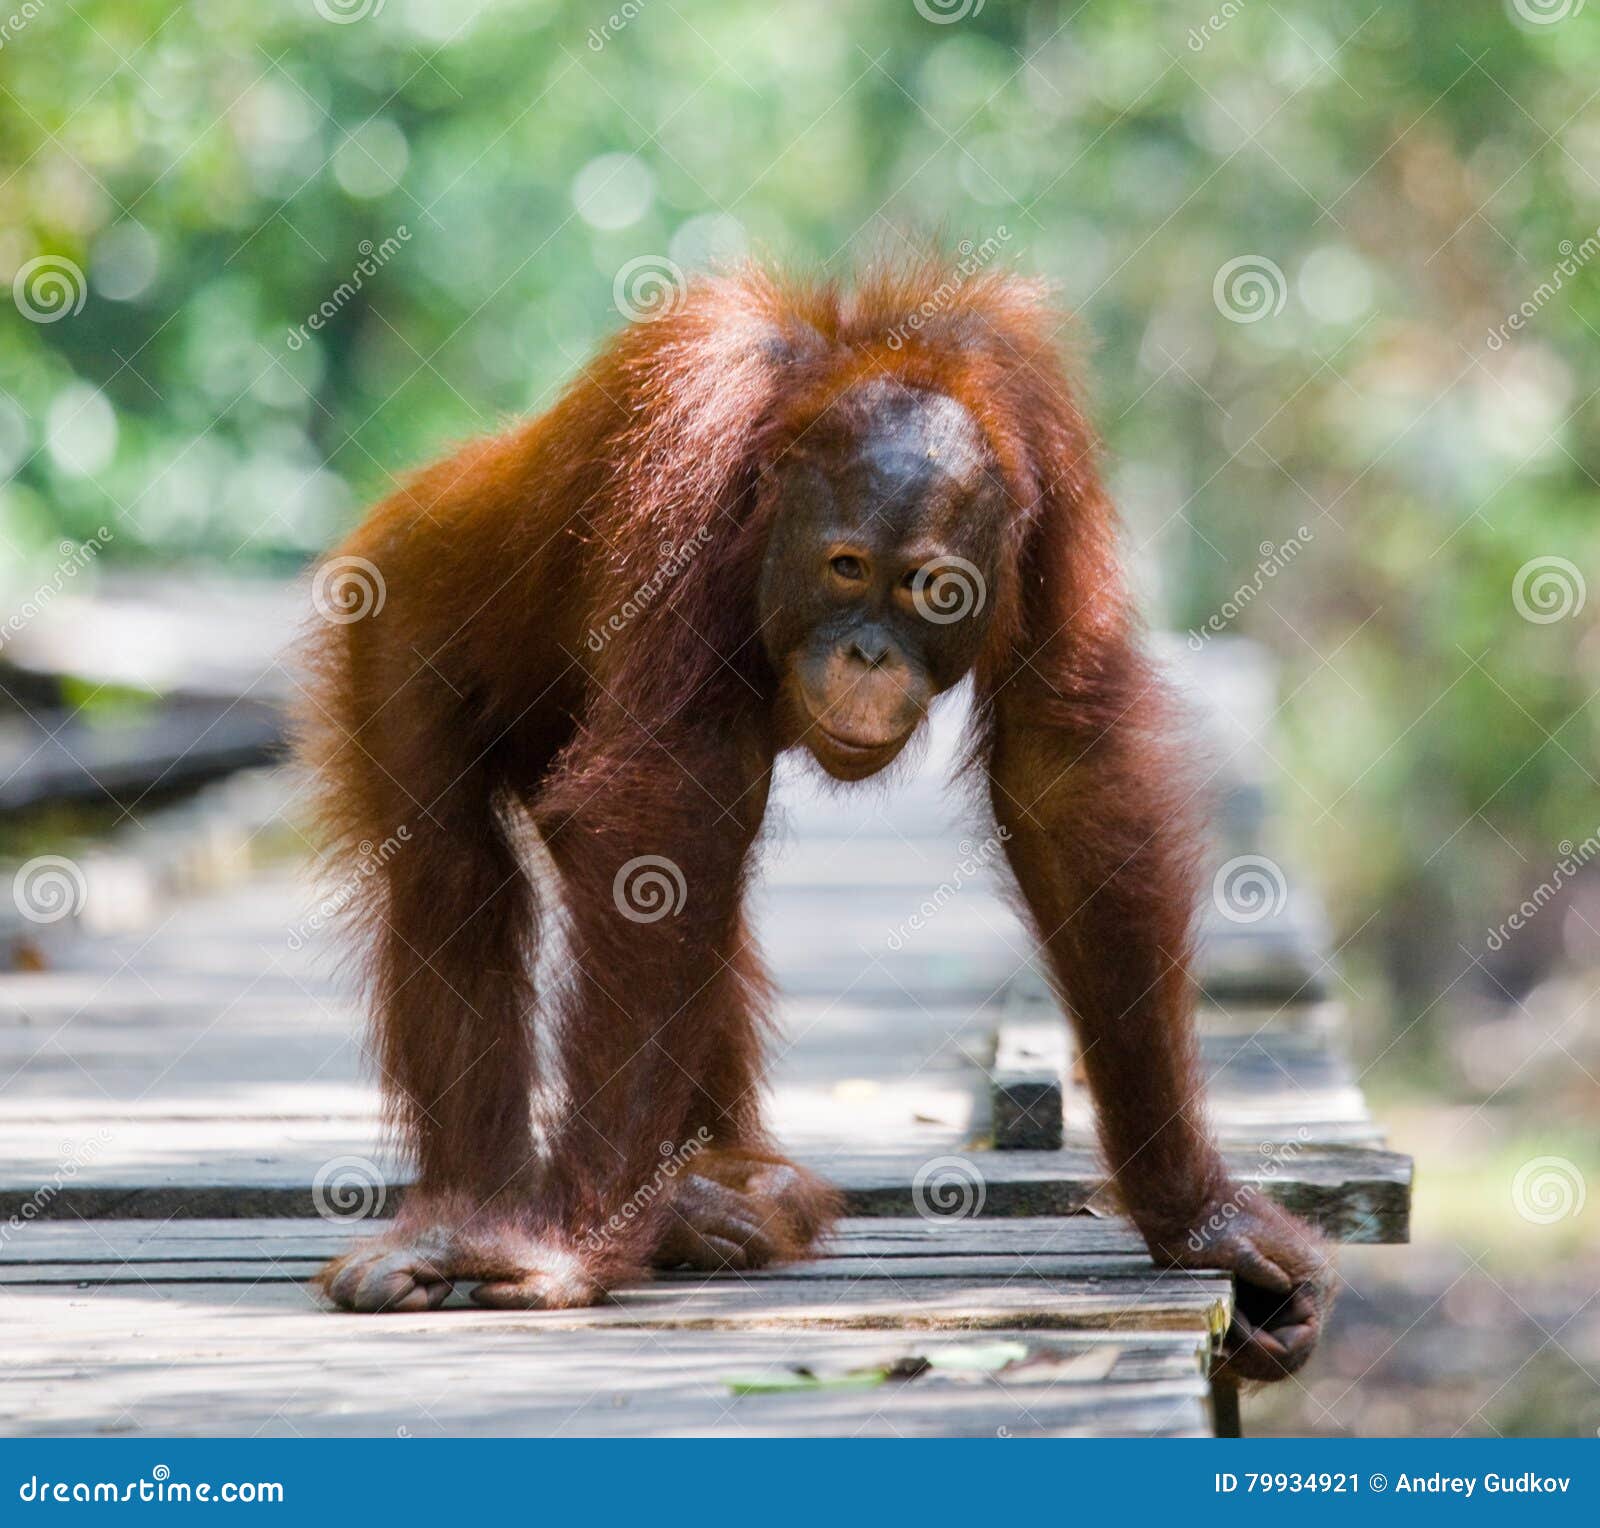 Young Orangutan  Standing  On A Wooden Platform In The 